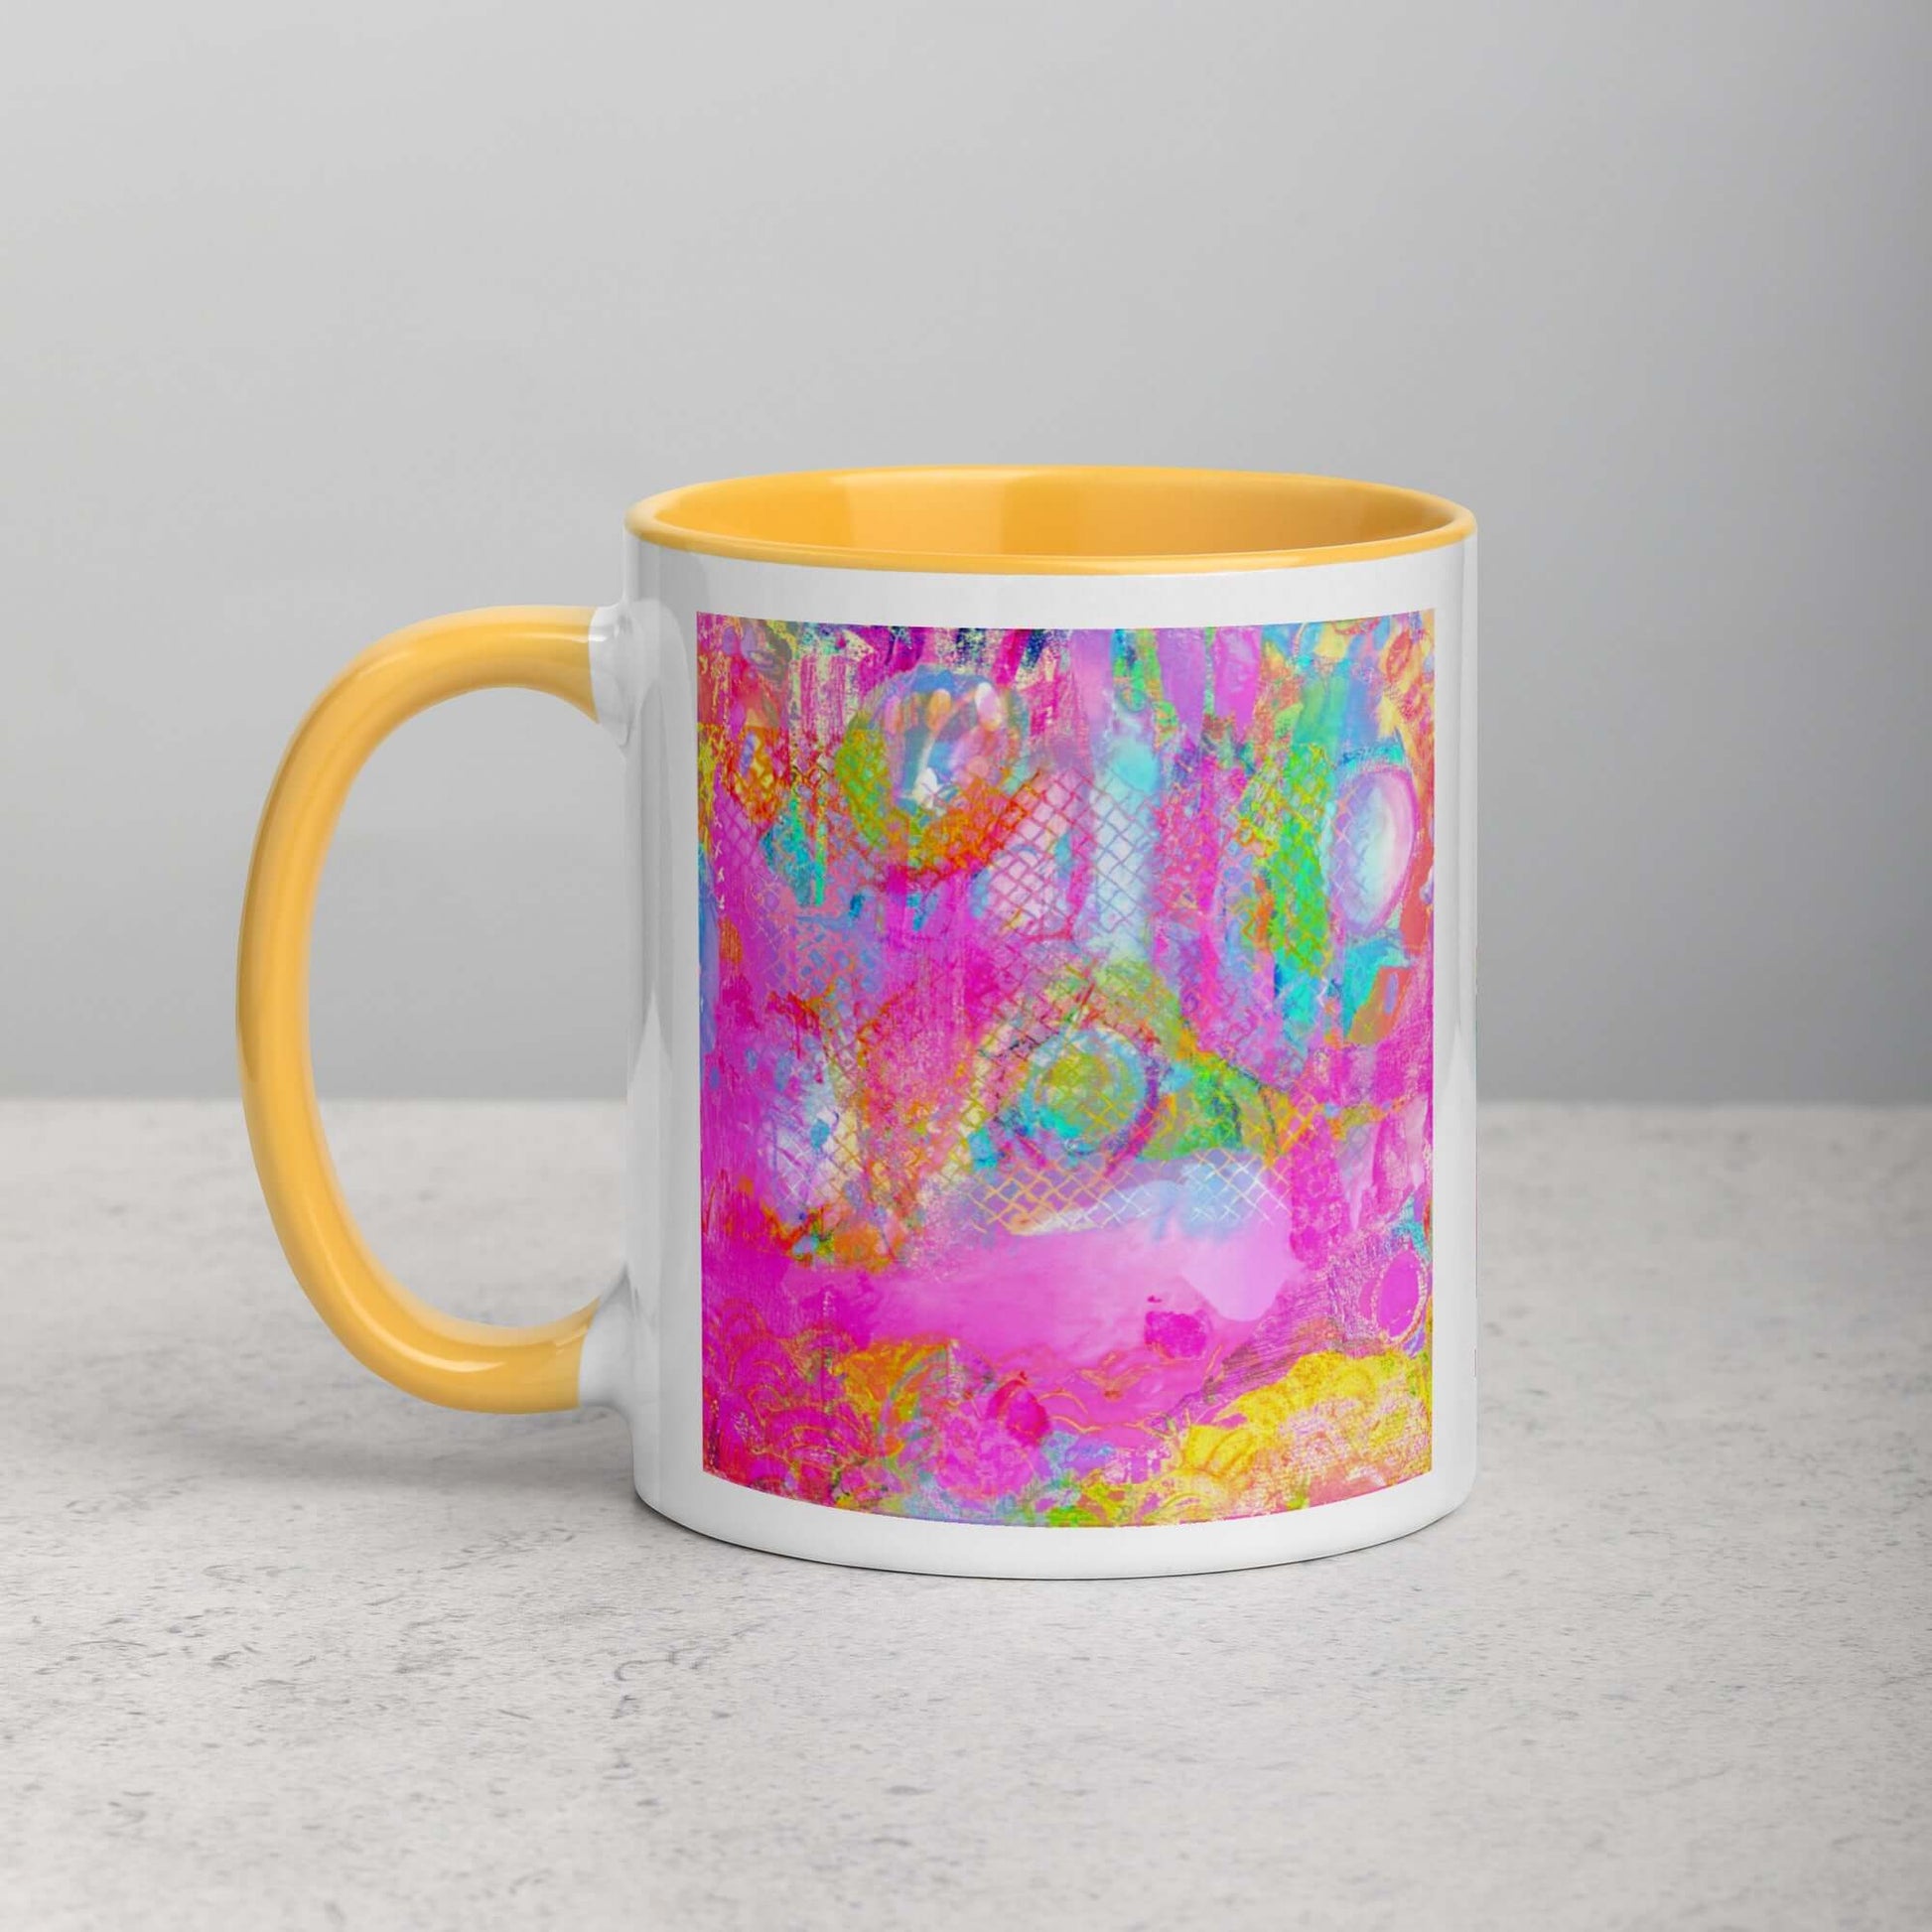  Drippy Pink “Candyland” Abstract Art Mug with Golden Yellow Color Inside Left Handed Front View